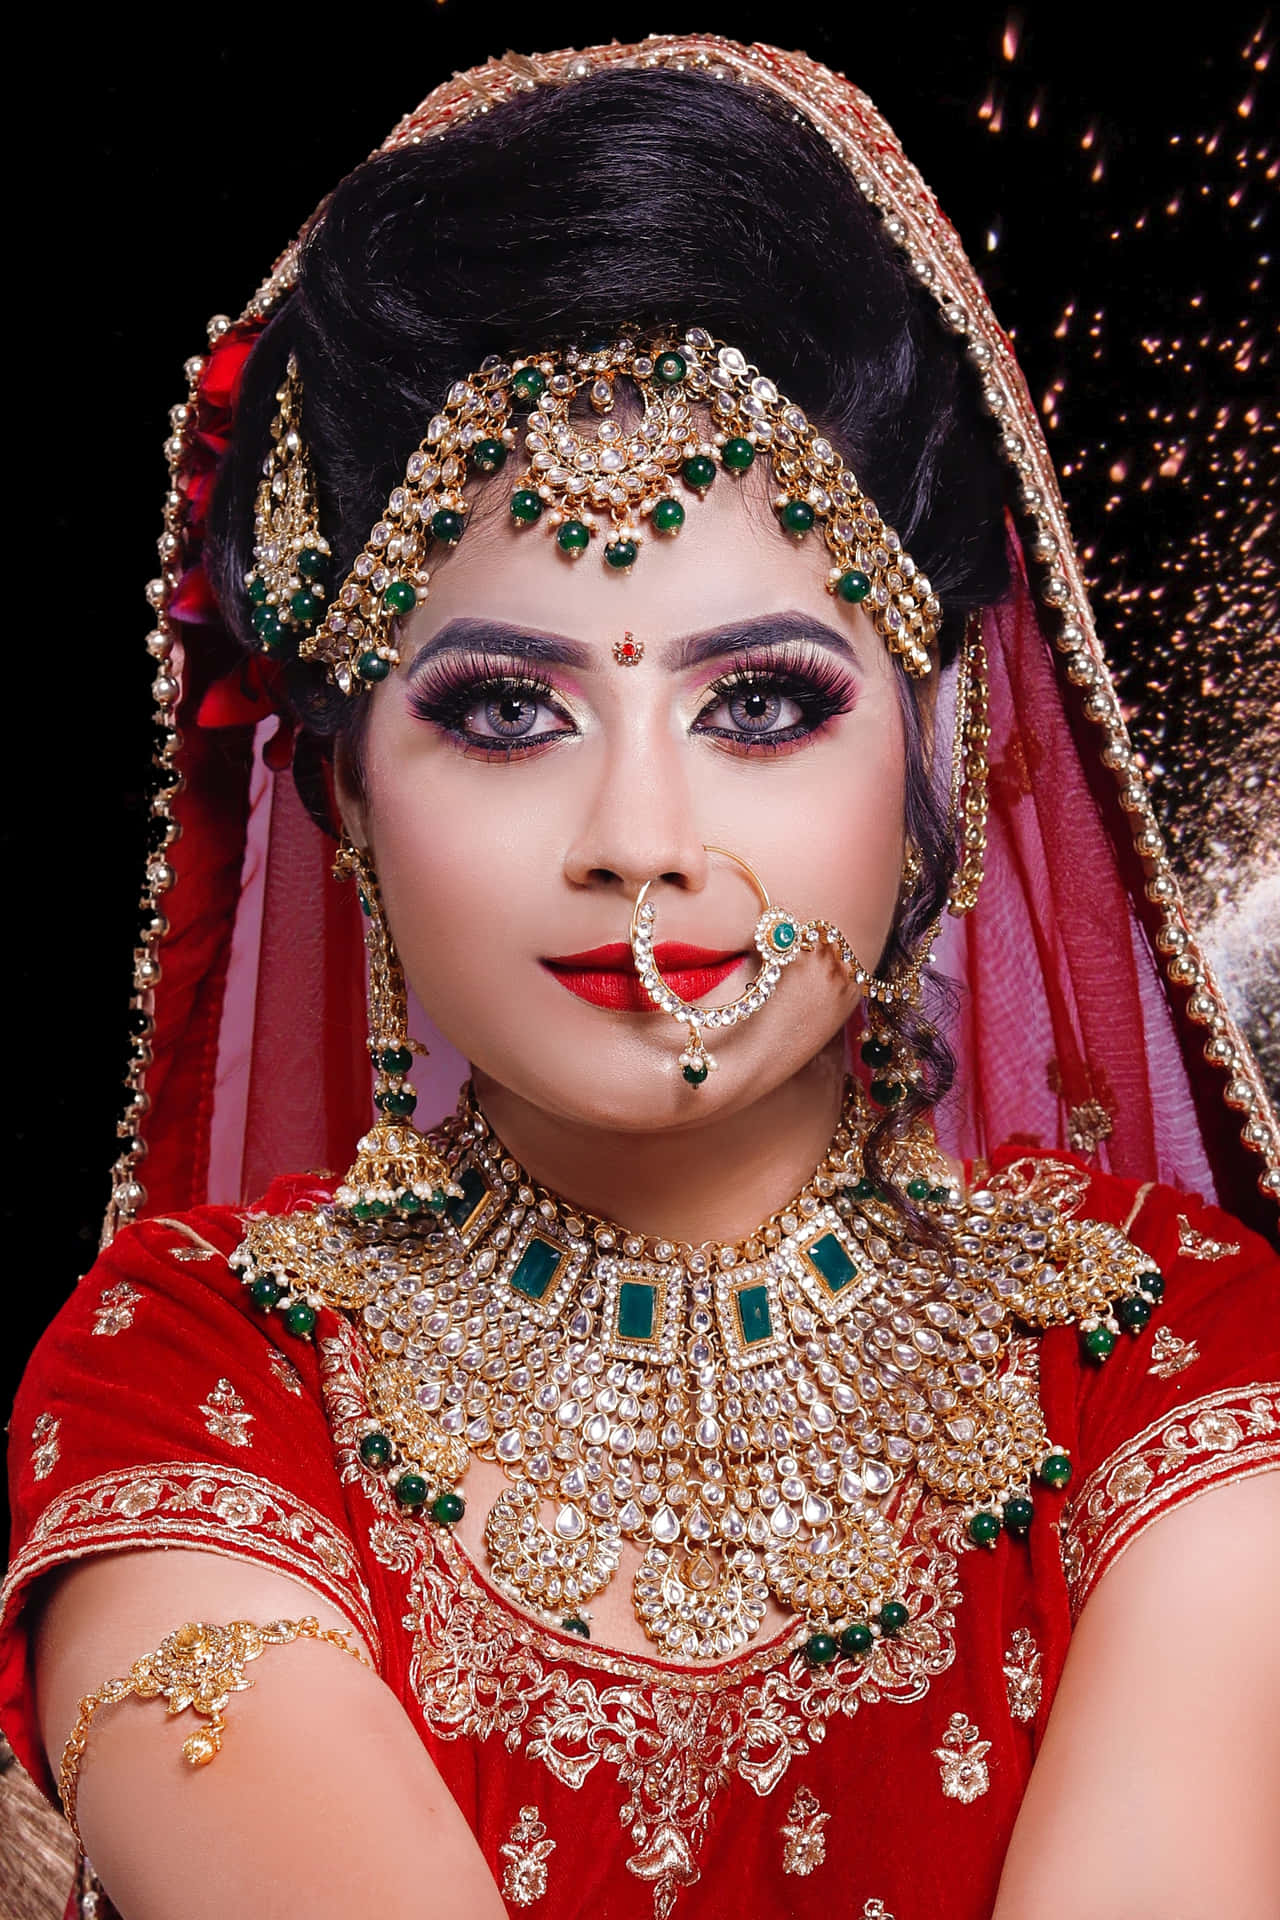 A Beautiful Bride In Red And Gold Makeup